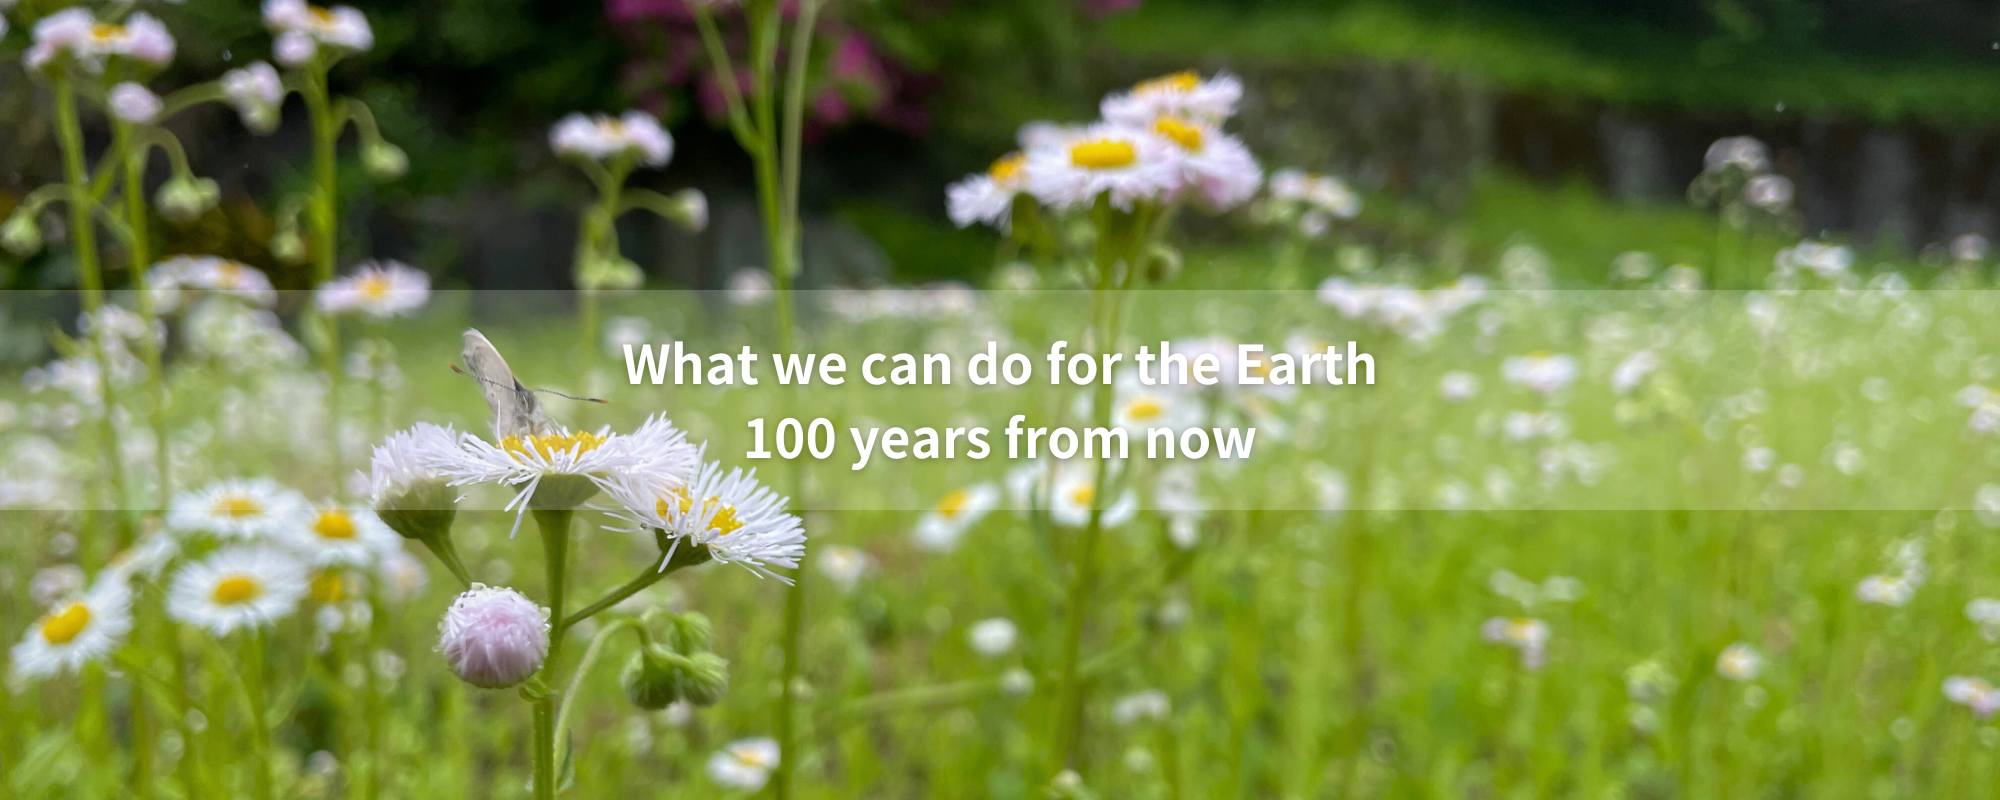 What we can do for the Earth 100 years from now